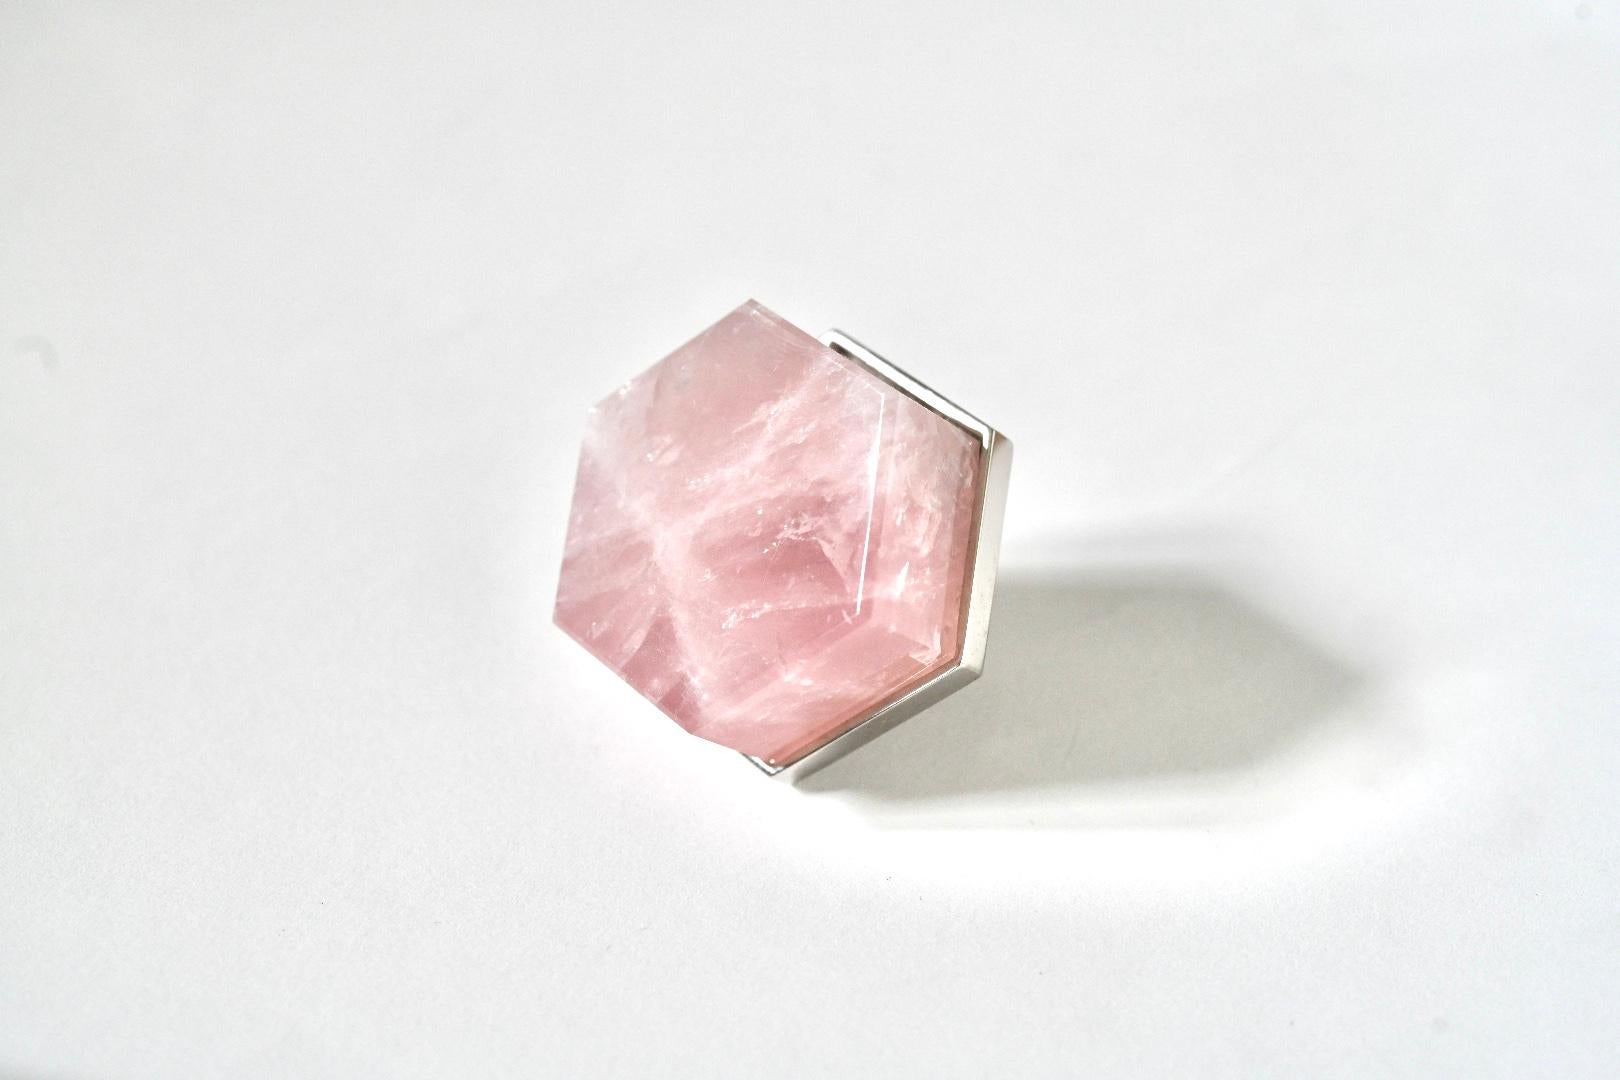 Hexagon form rose rock crystal quartz knob with nickel plating base. Created by Phoenix Gallery, NYC.